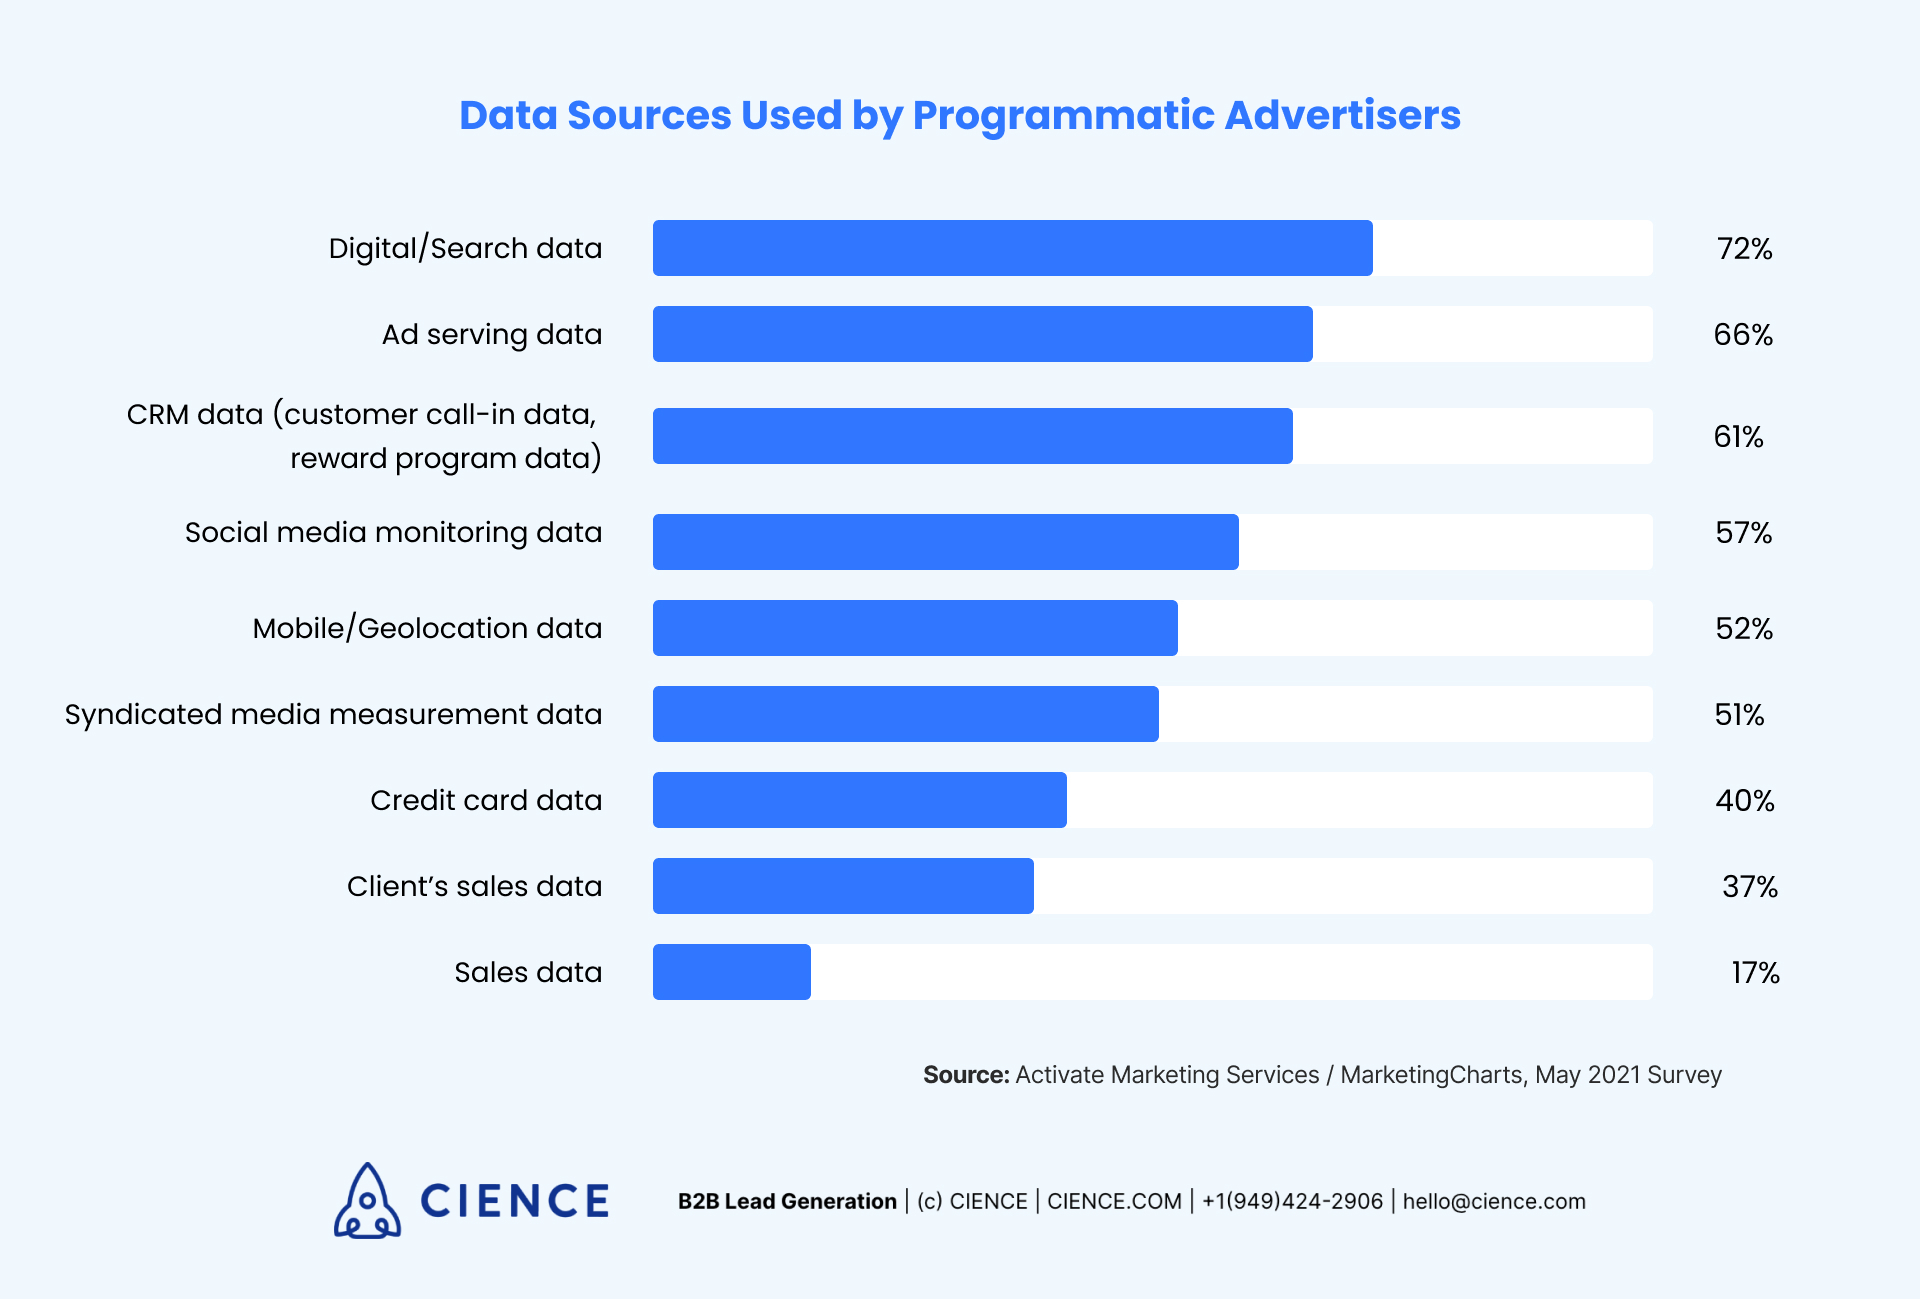 Data Sources Used by Programmatic Advertisers